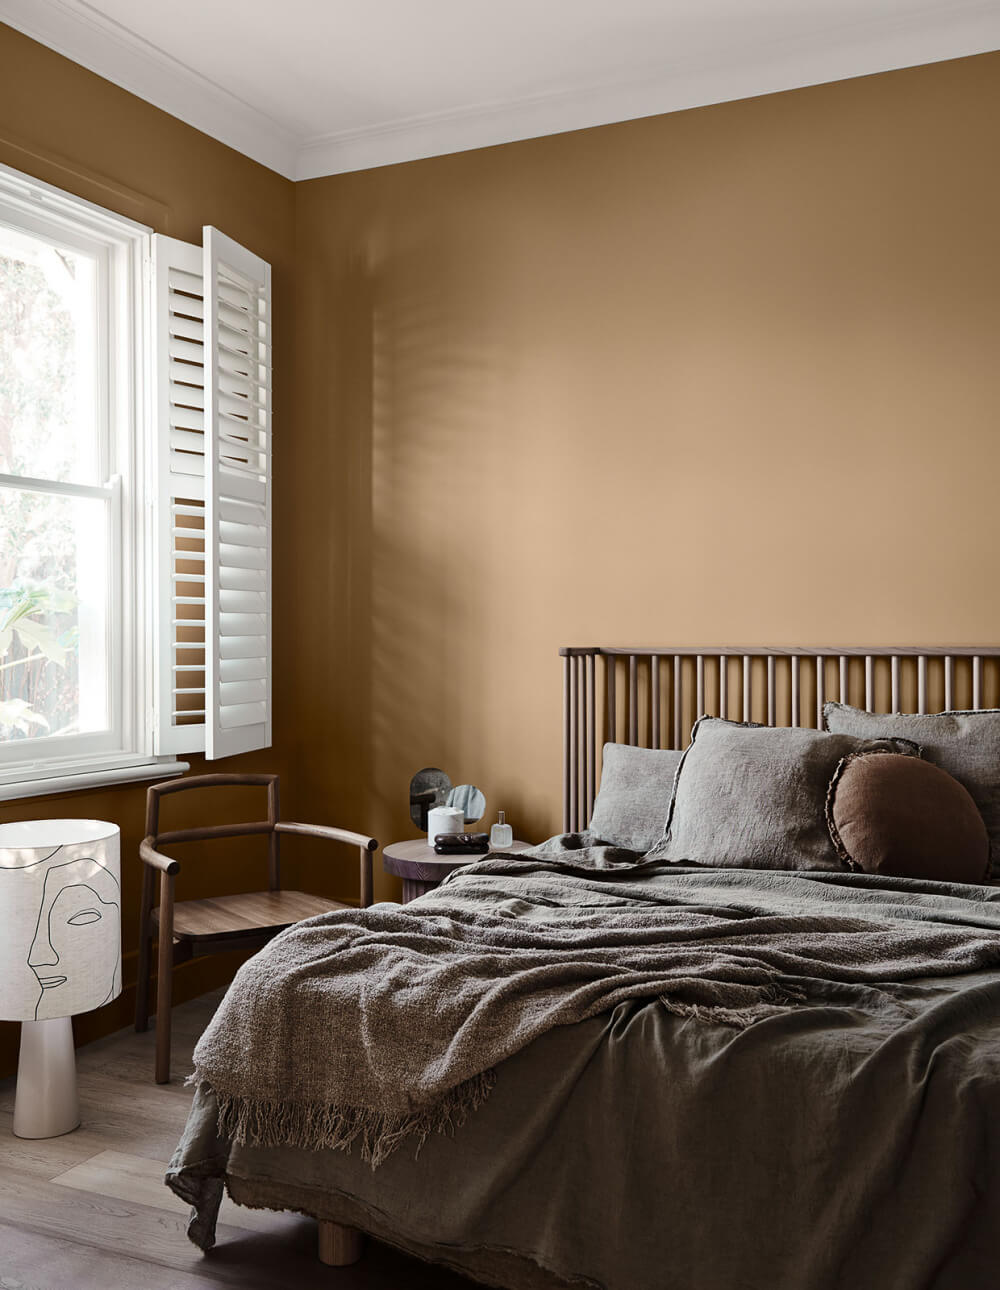 TheNordroom DuluxColorForecast2020 2 The Color Trends For 2020 Are Inspired by Nature